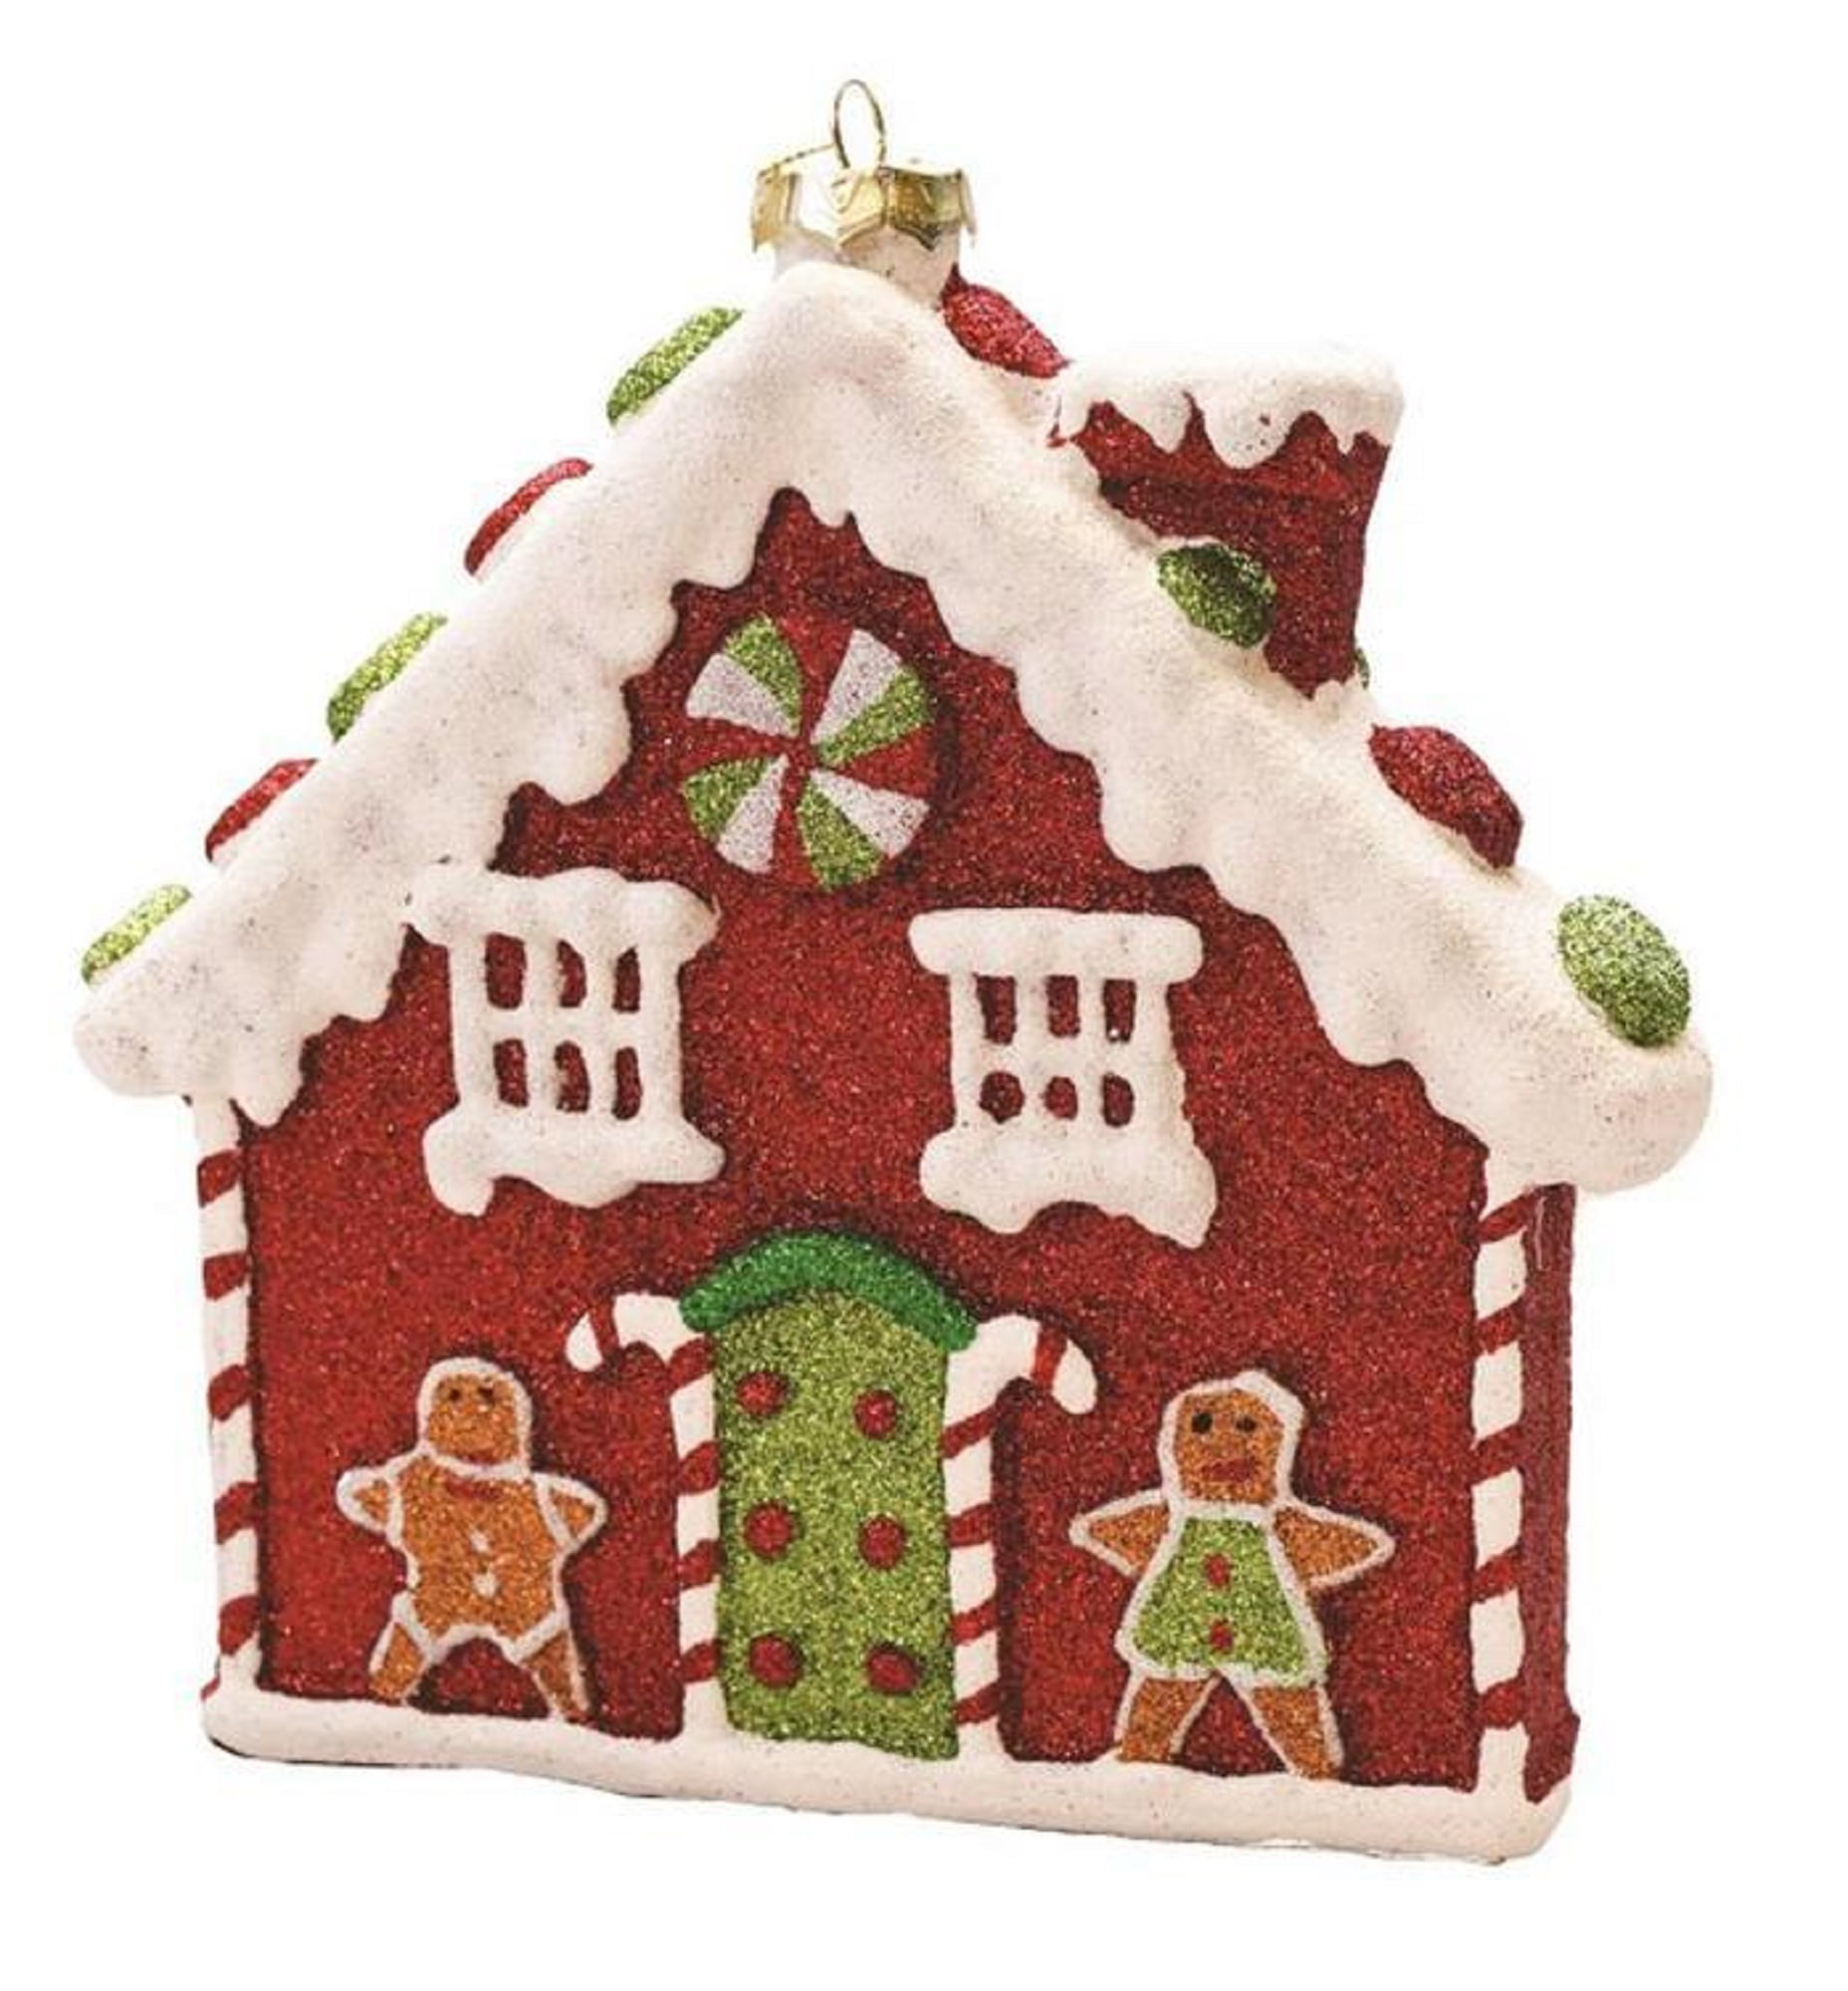 1 ORN ONLY CHRISTMAS GINGERBREAD CHURCH  RESIN DIMENSIONAL ORNAMENT-NEW 